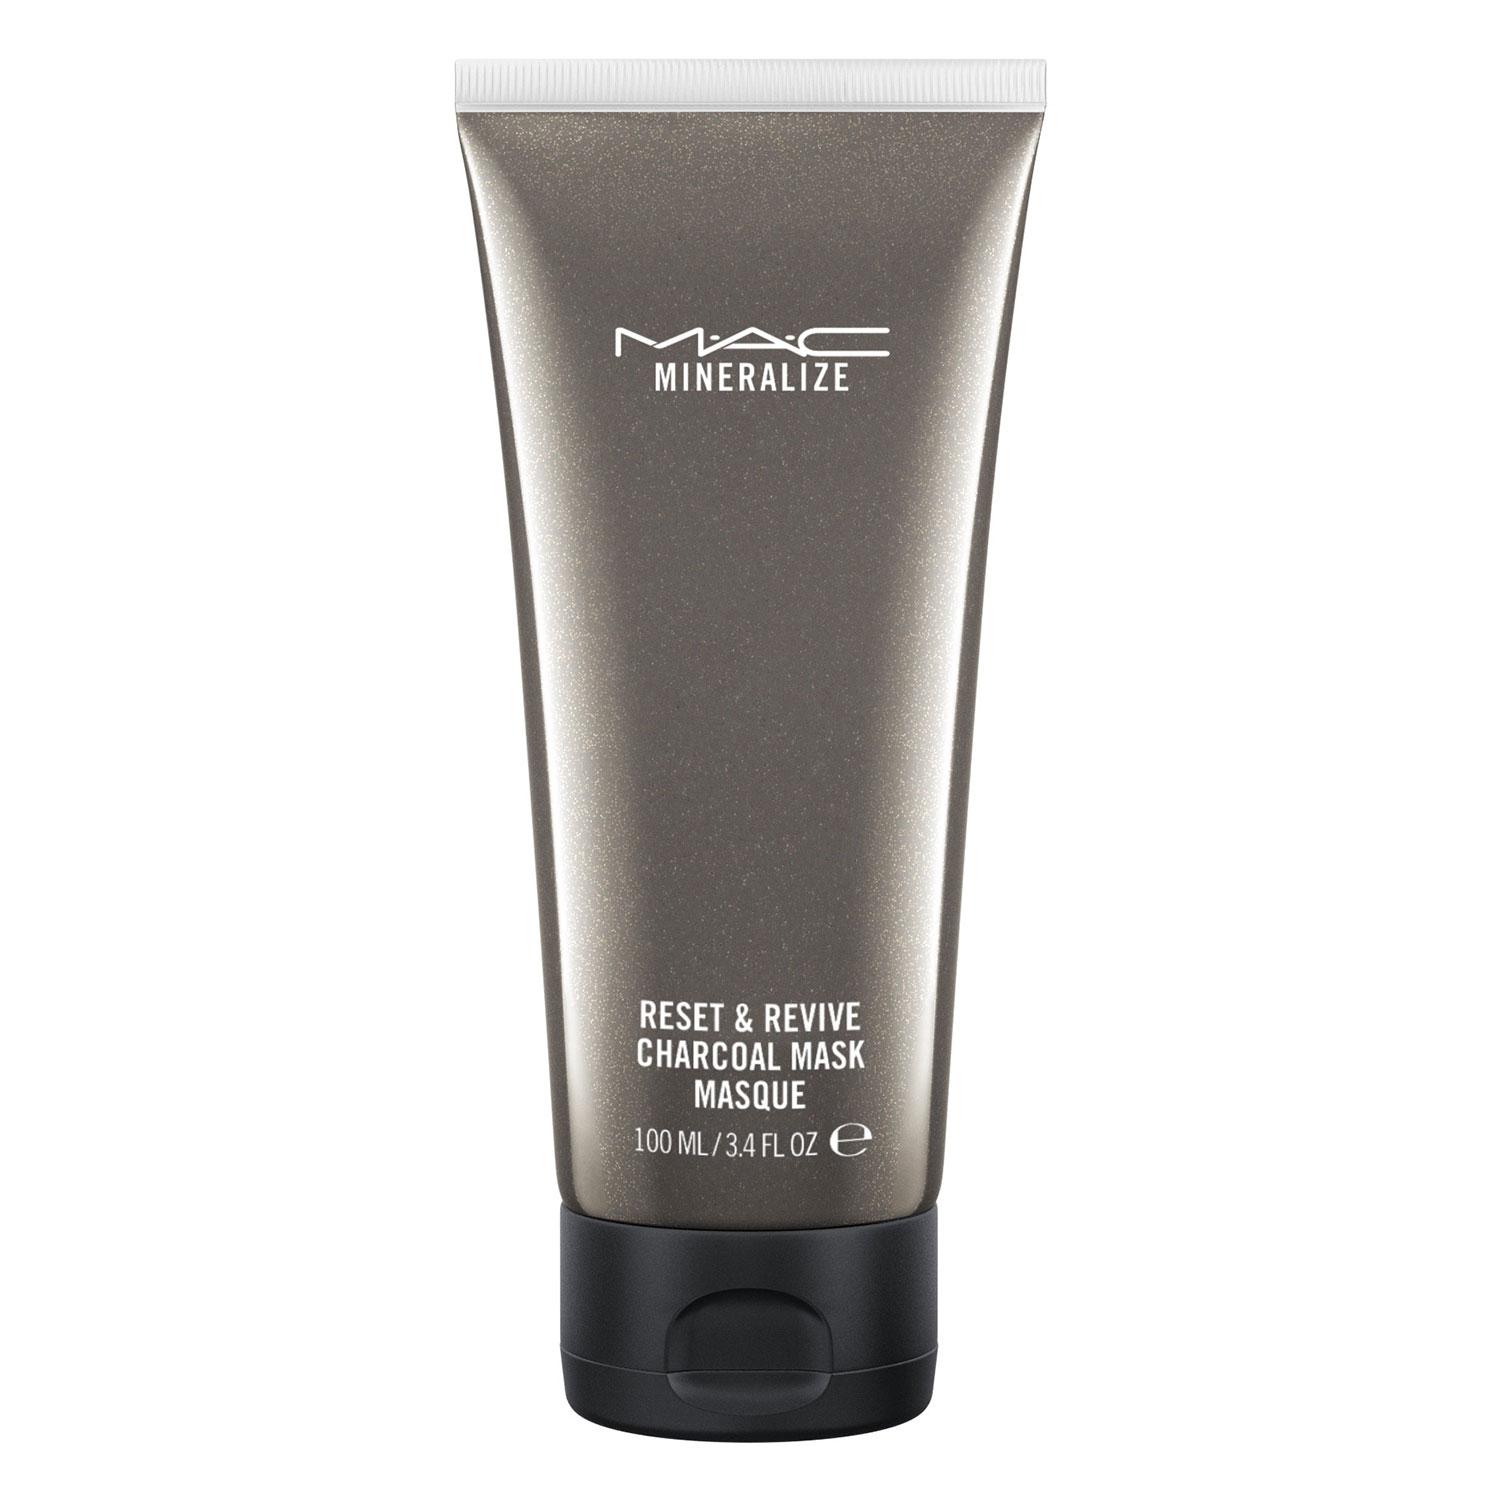 M·A·C Skin Care - Mineralize Reset & Revive Charcoal Mask